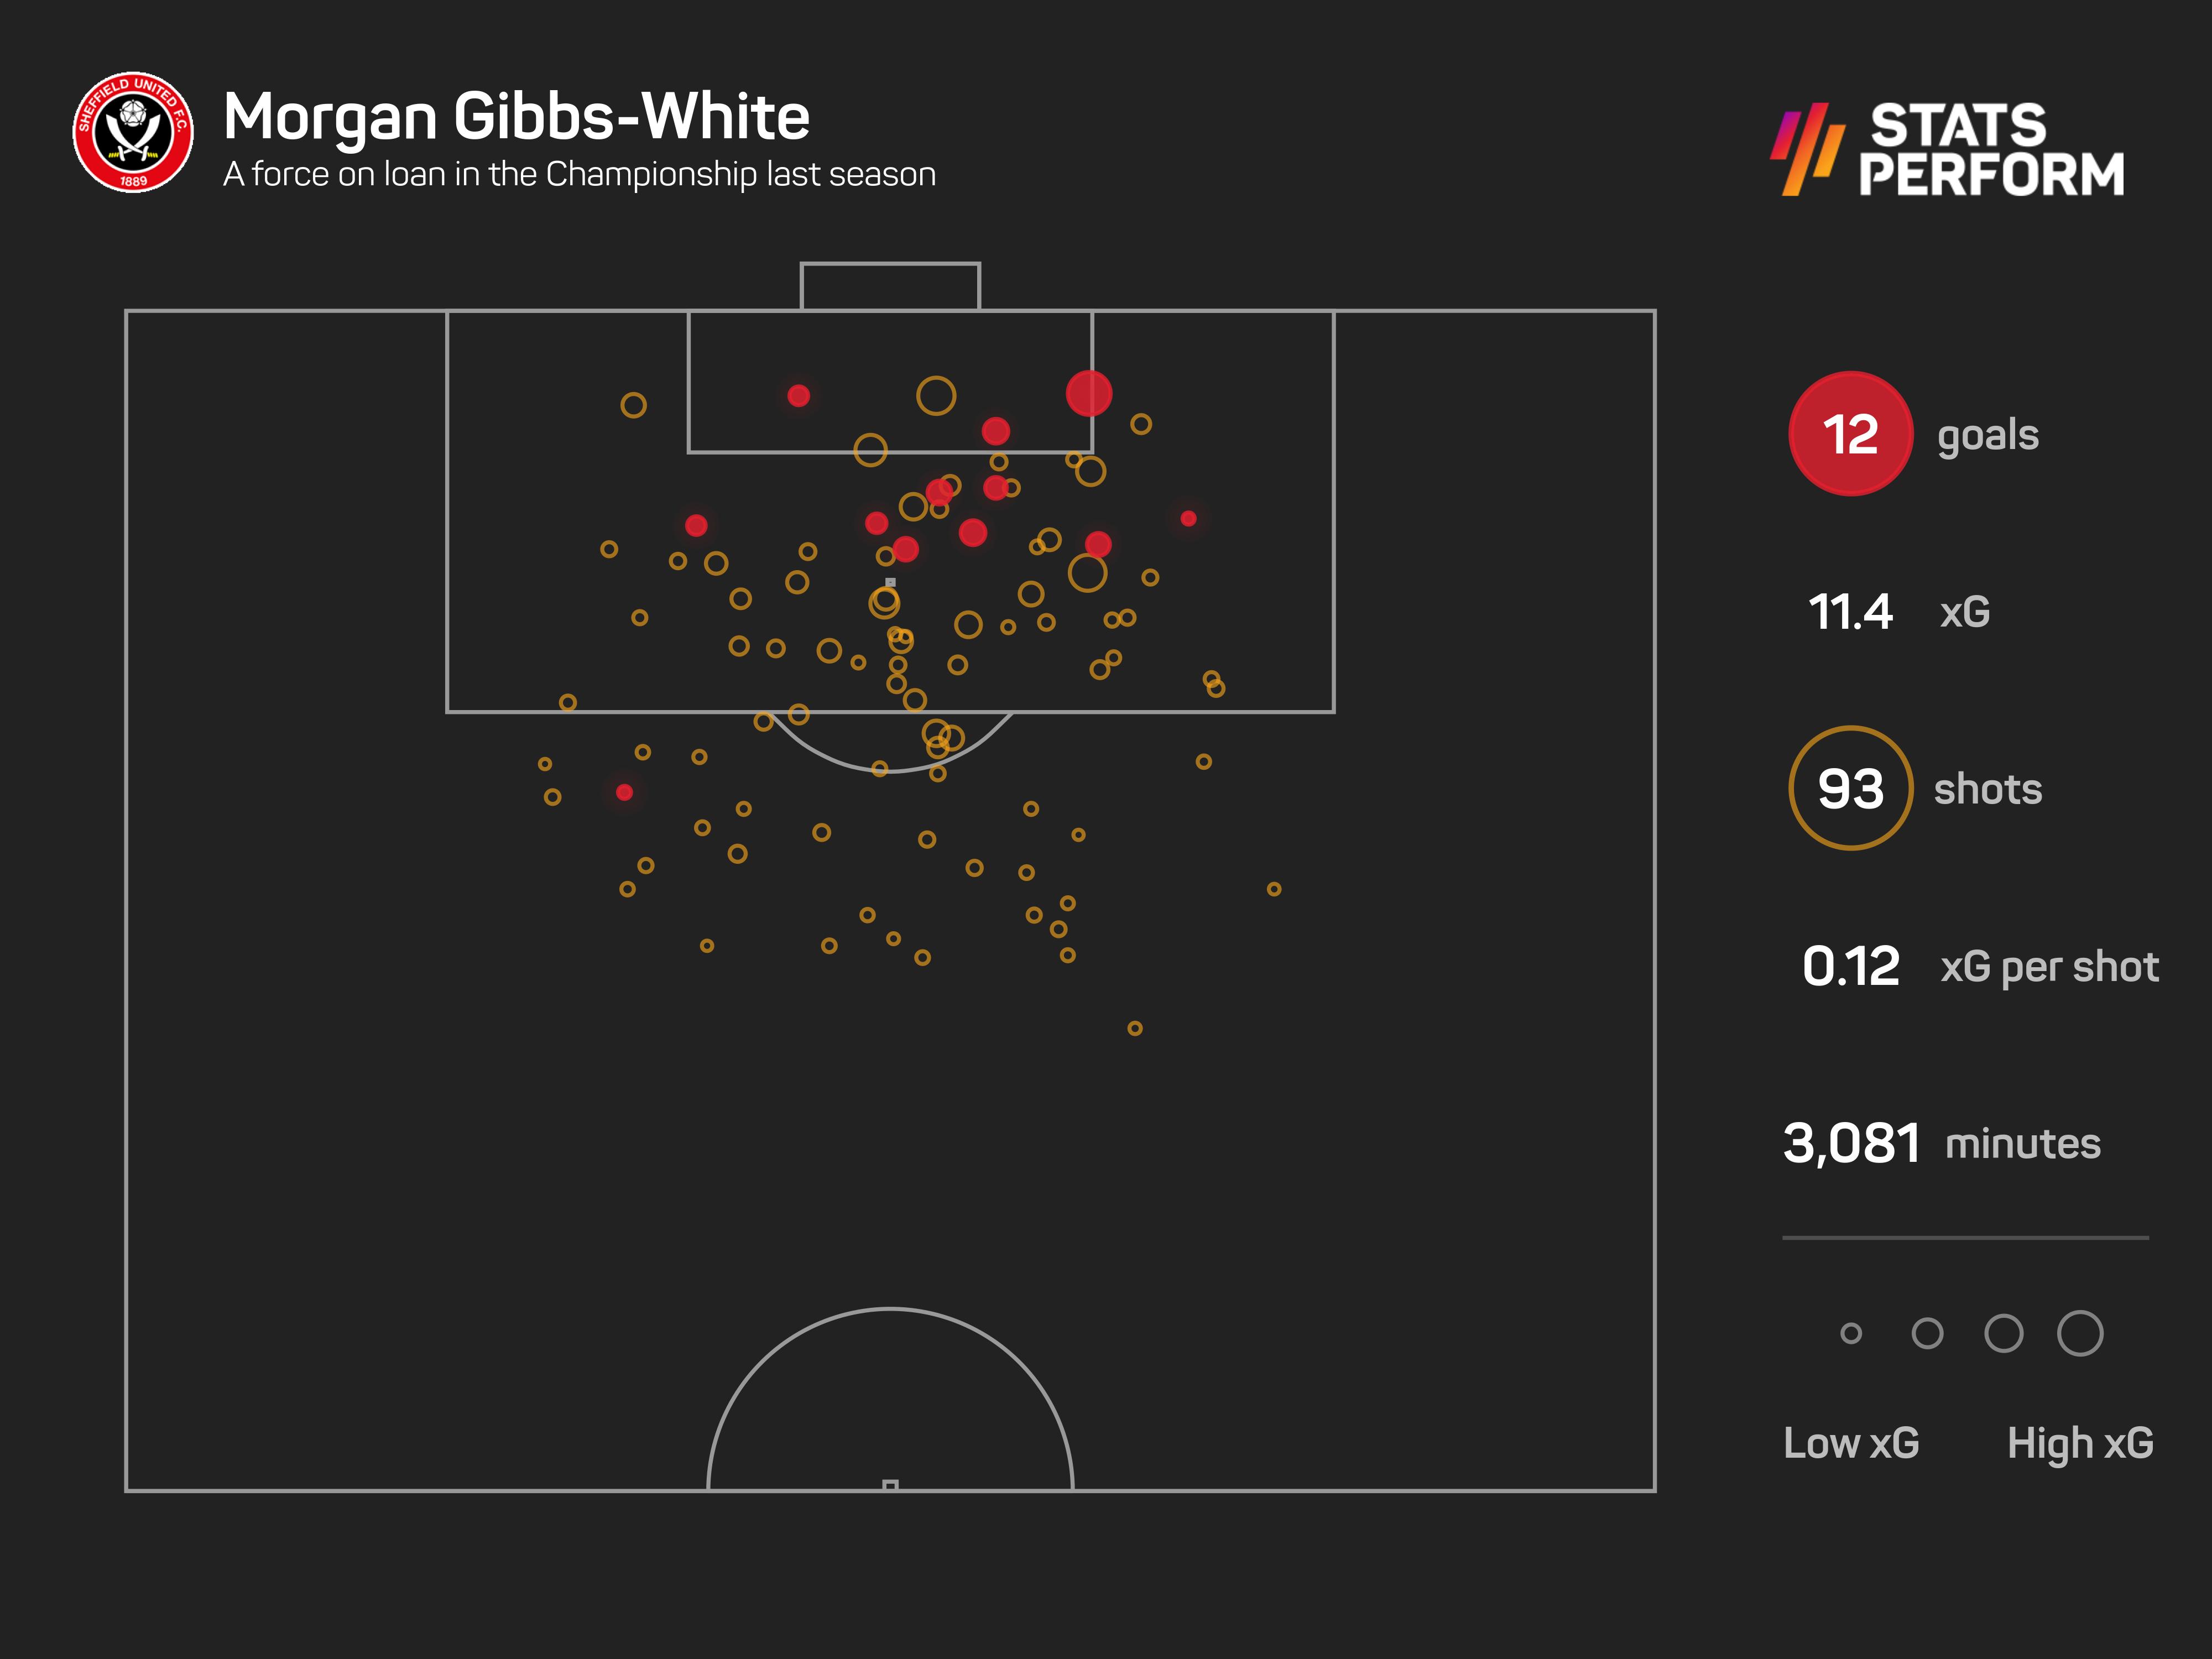 Morgan Gibbs-White impressed while on loan at Sheffield United